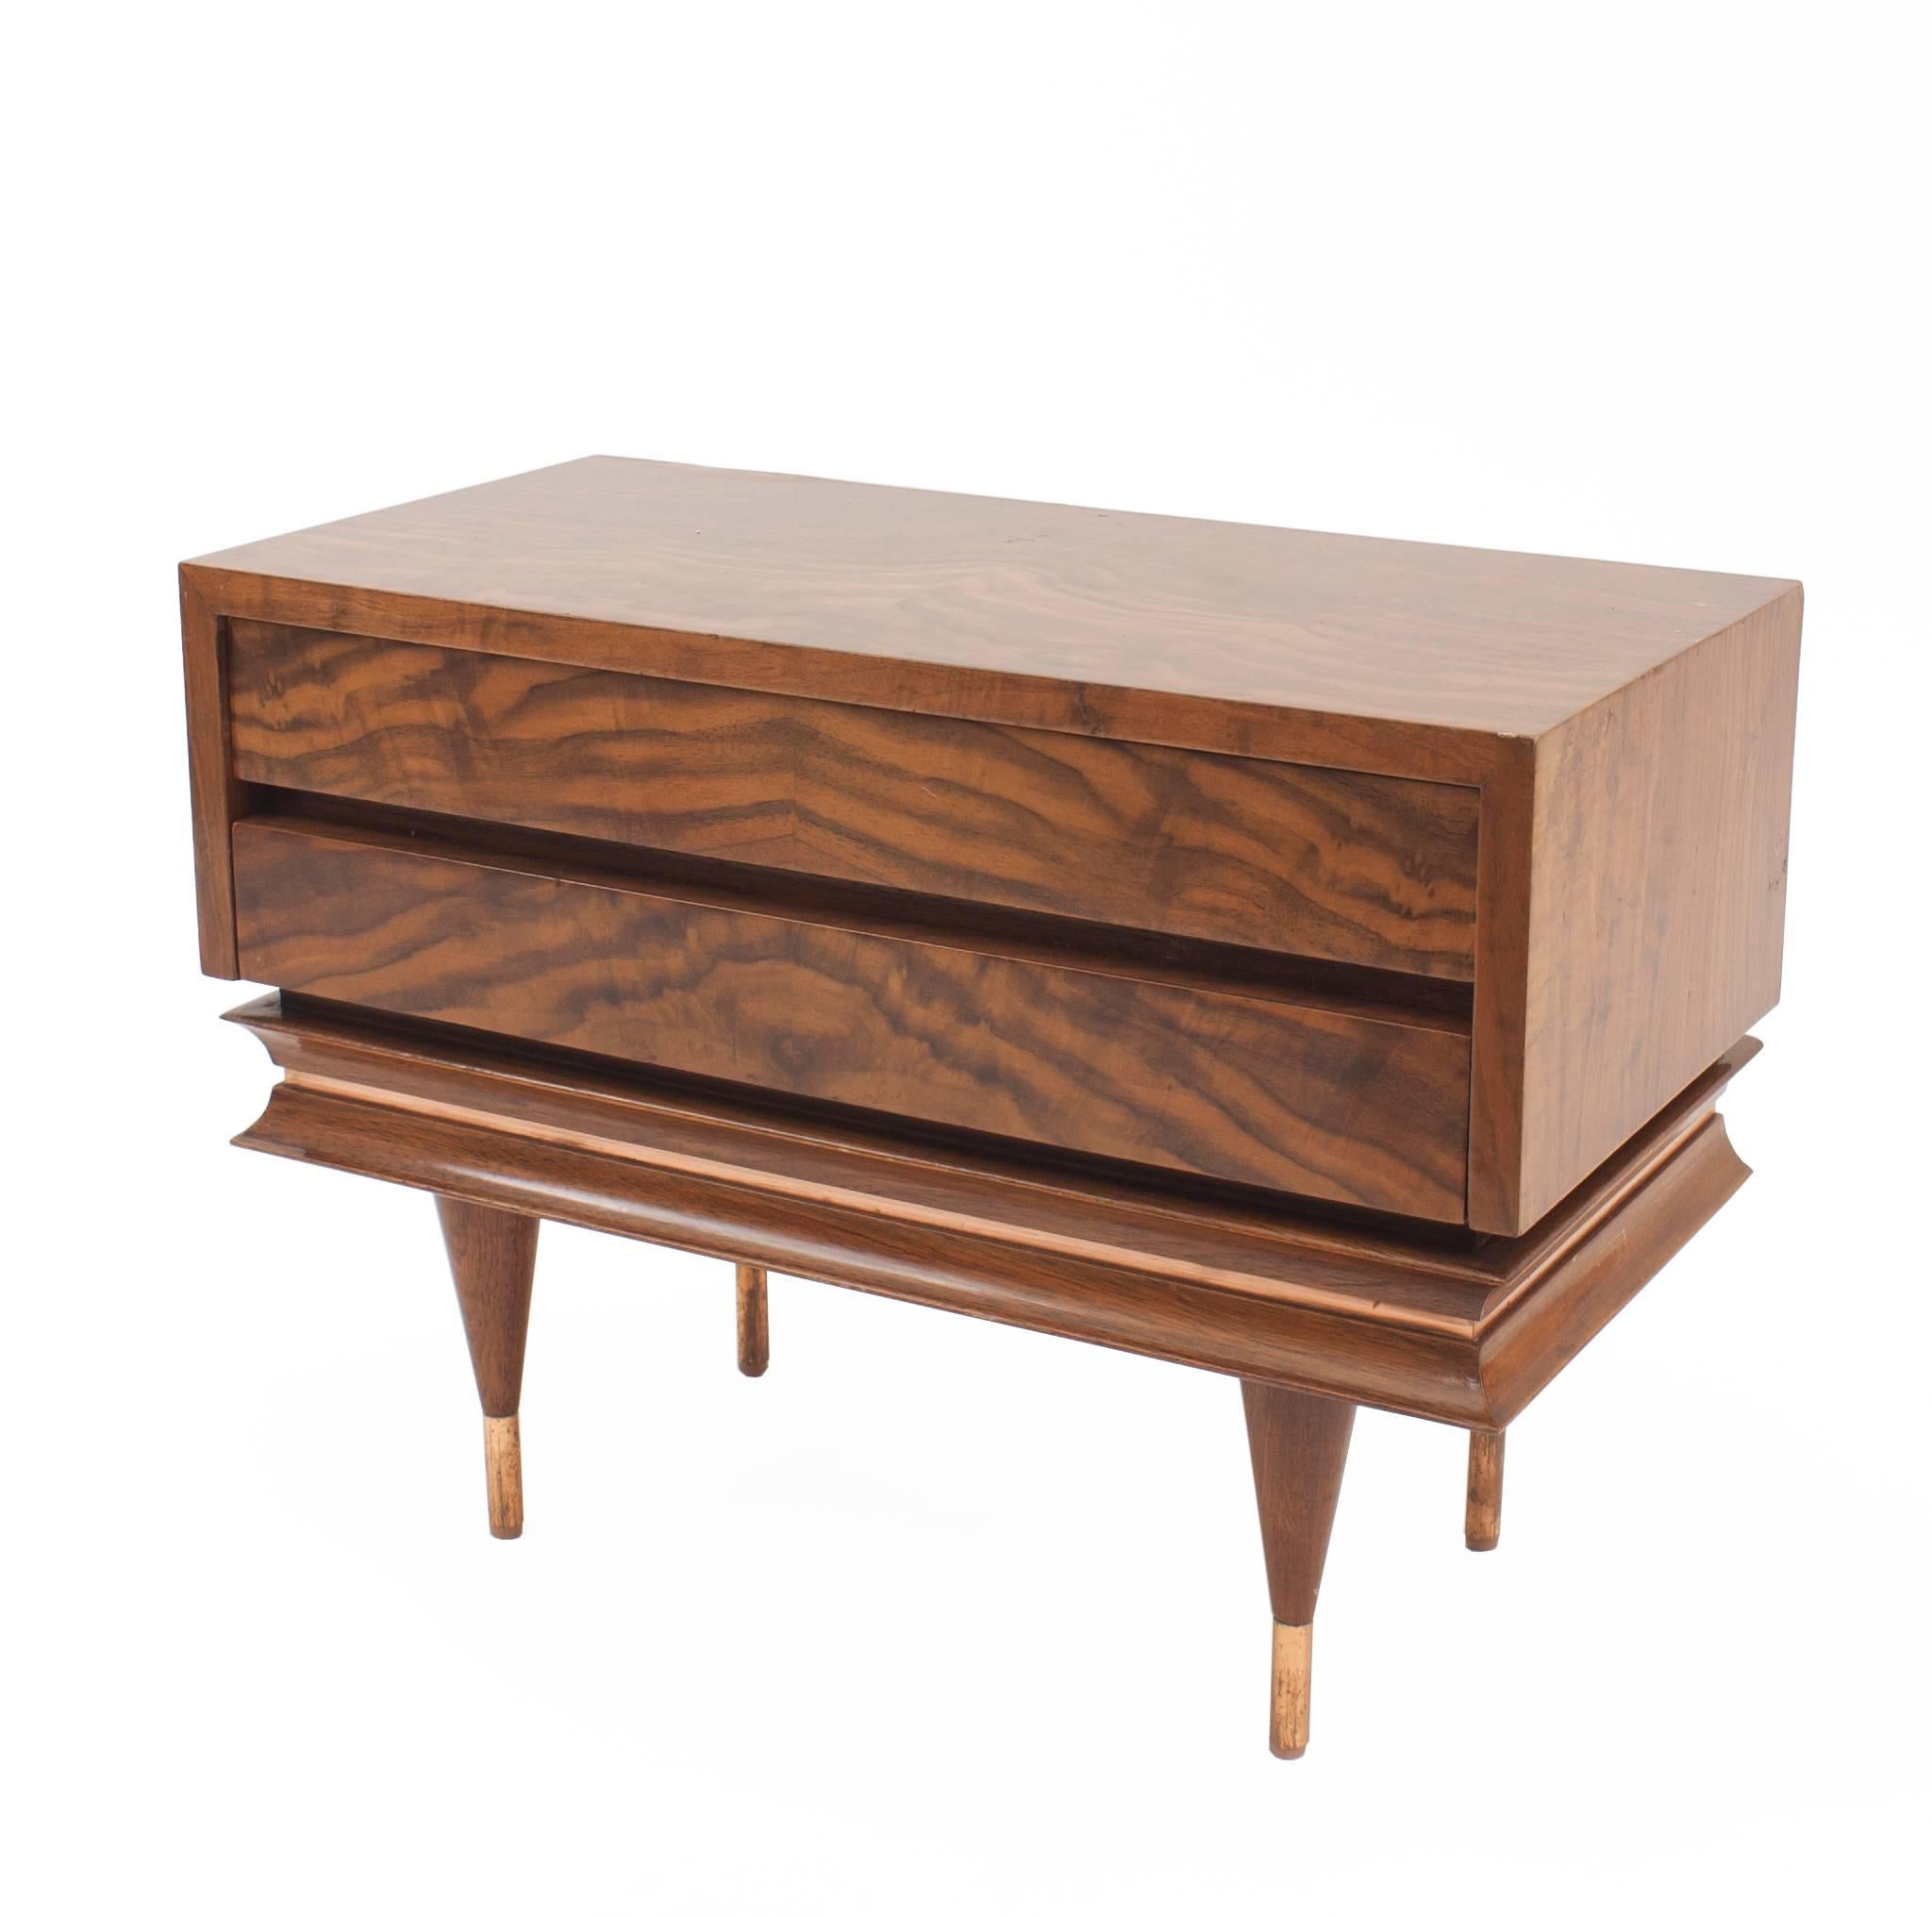 Pair of Italian Post-War design low rectangular burl walnut low chest or end tables with two drawers supported on tapered cylindrical legs (attributed Gio Ponti).


Giovanni “Gio” Ponti, (Milan, November 18, 1891 - Milan, September 16, 1979), is